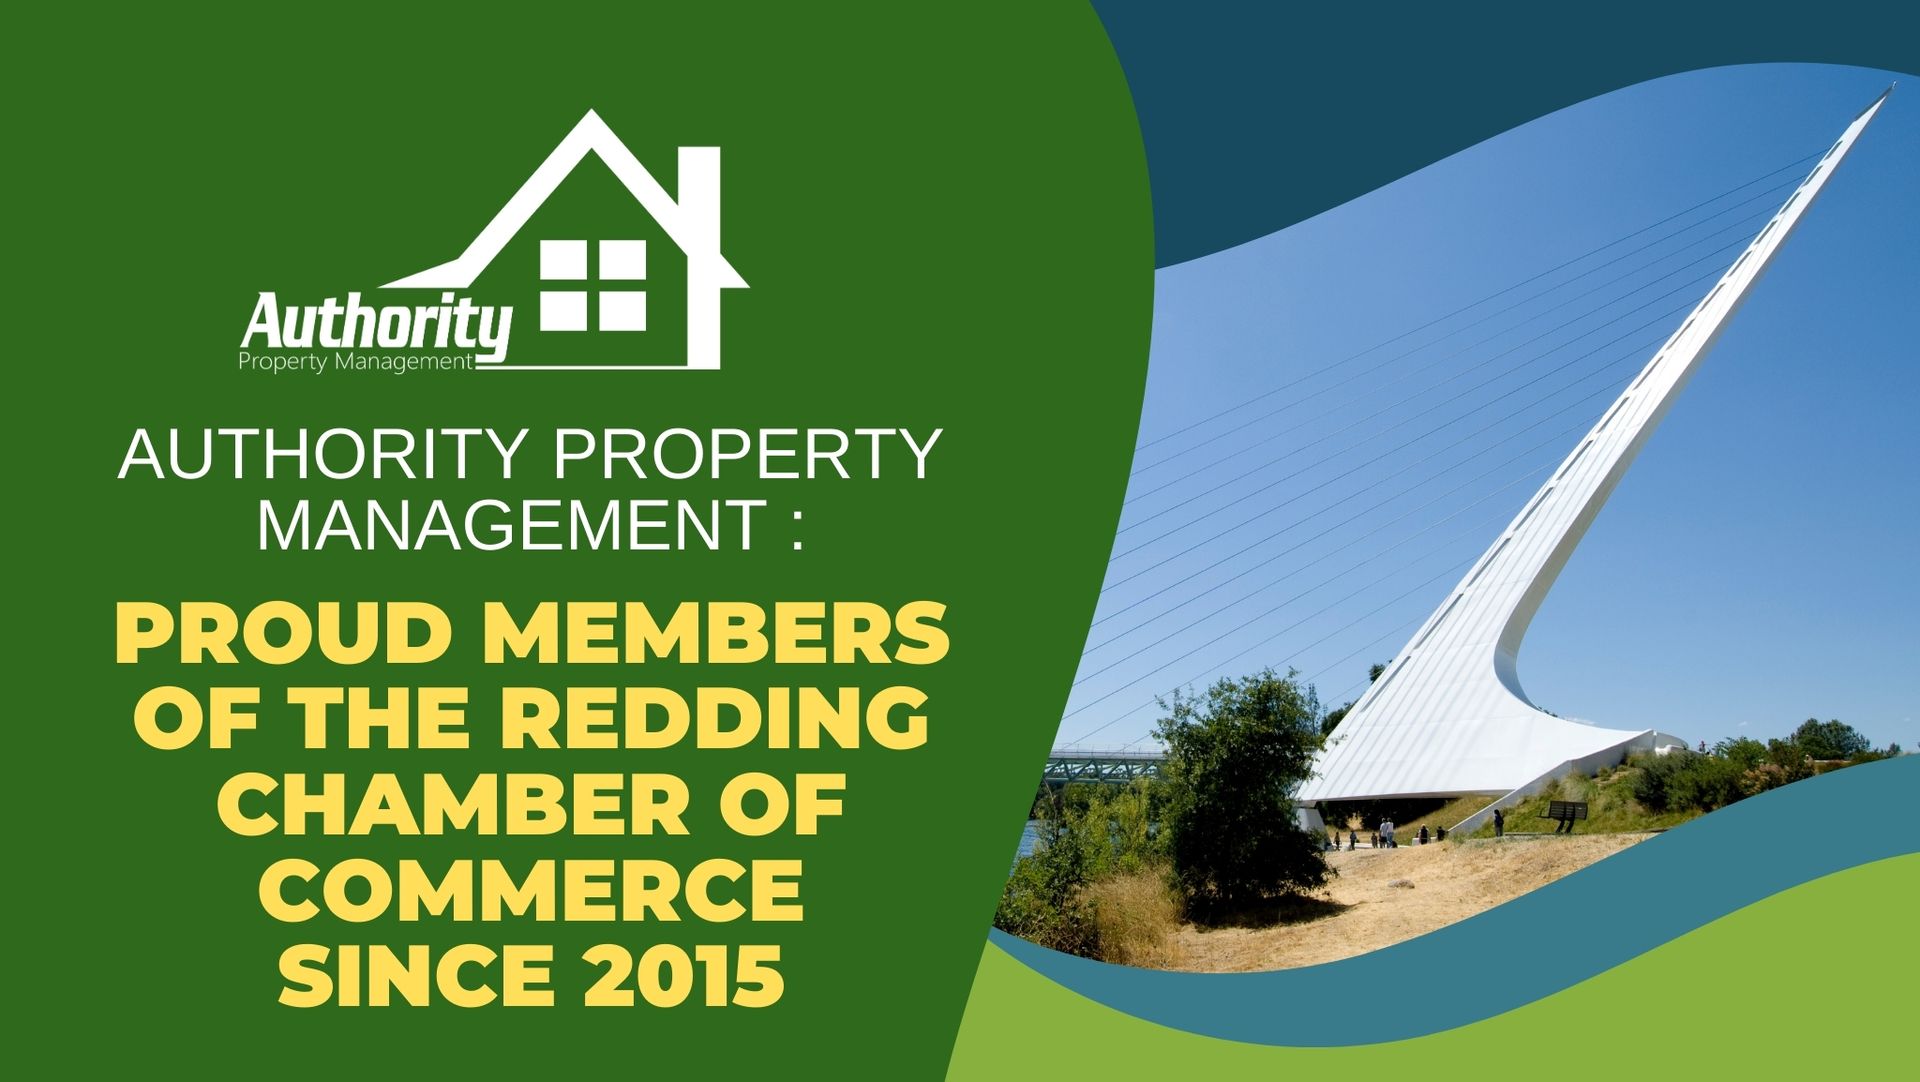 Thumbnail image with text Authority Property Management Proud Members of Redding Chamber of Commerce